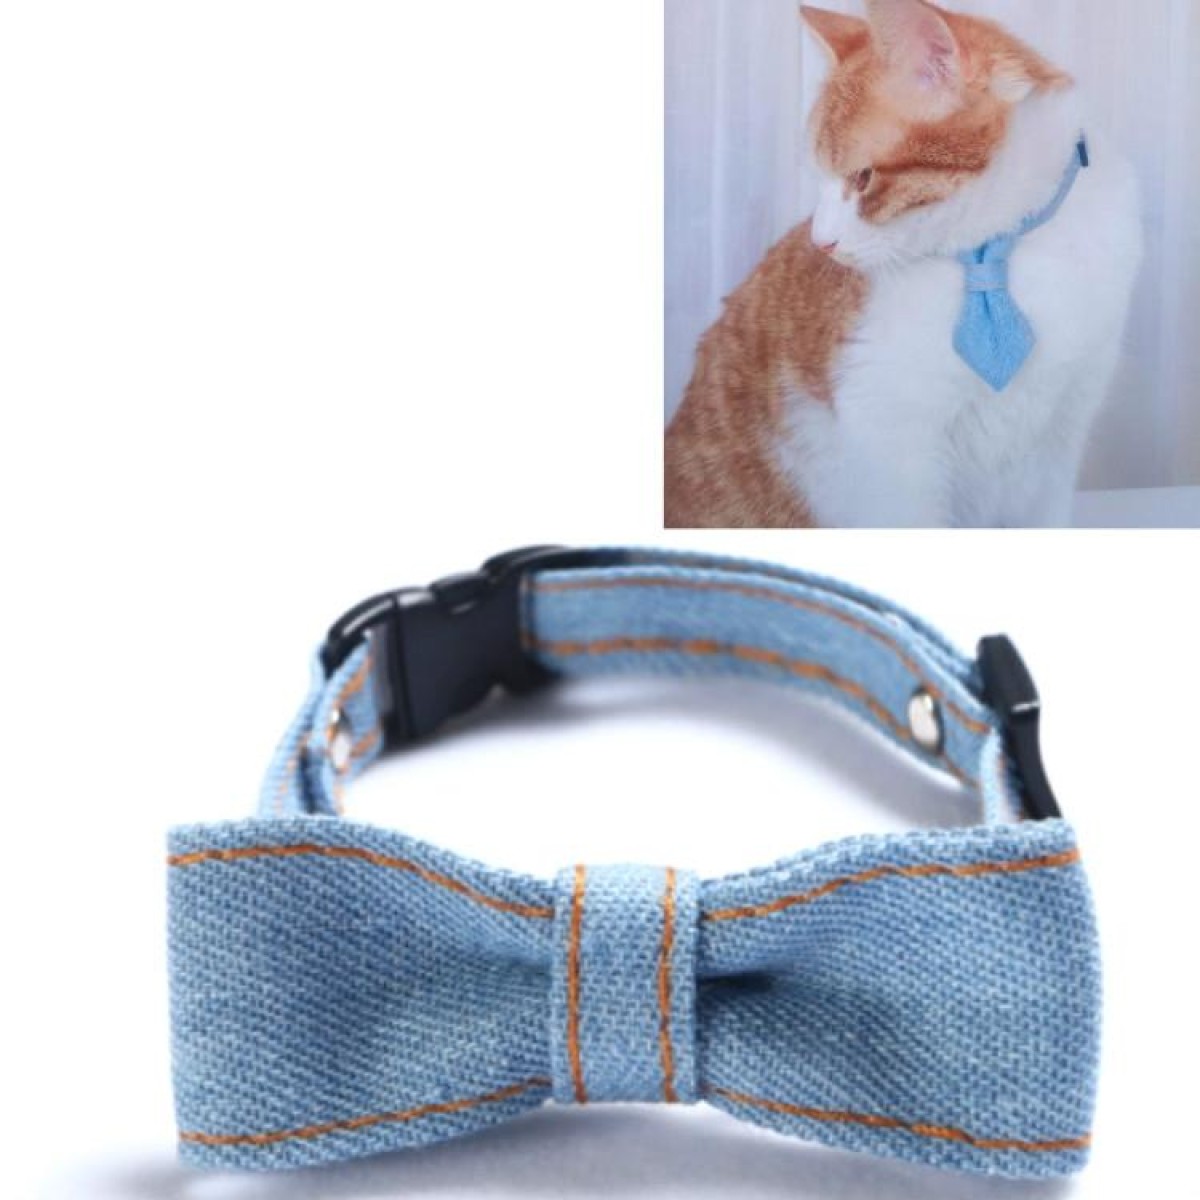 Pet Cowboy Bow Tie Collar Cats Dogs Adjustable Tie Collars Pet Accessories Supplies, Size:S 16-32cm, Style:Big Bowknot(Light Blue)